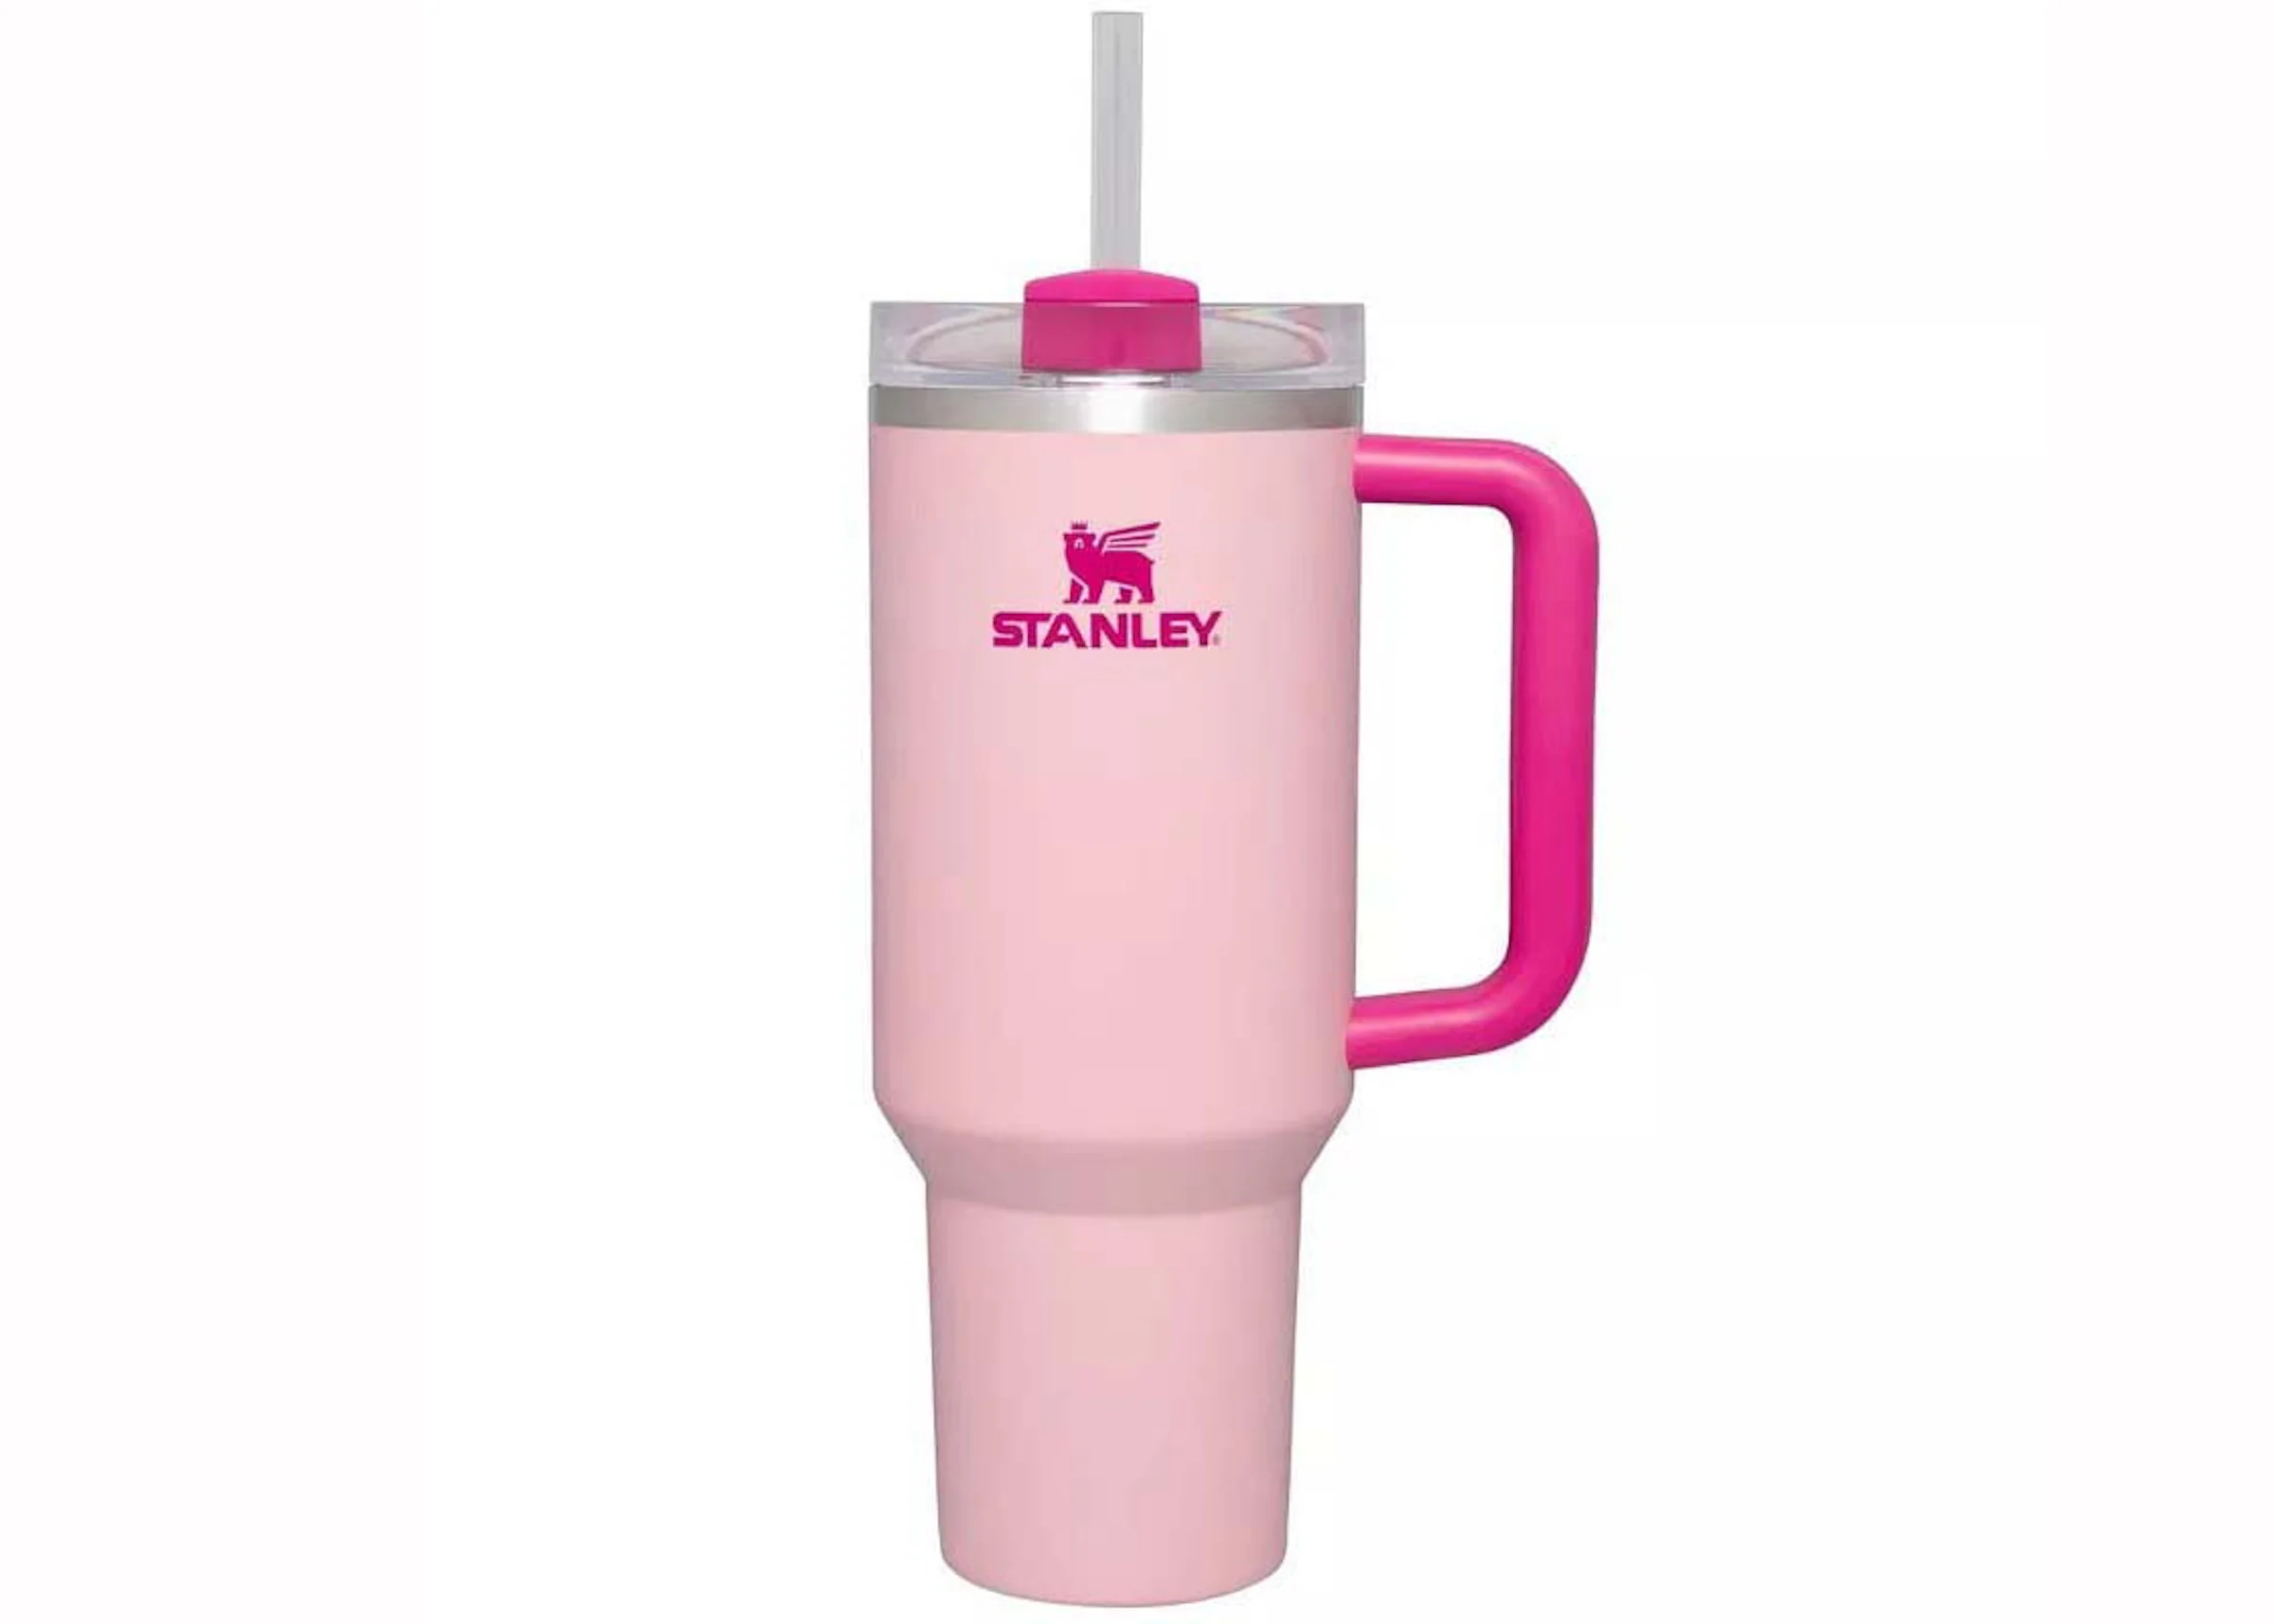 Stanley Flamingo Quencher 40oz Tumbler Pink in Stainless Steel - US